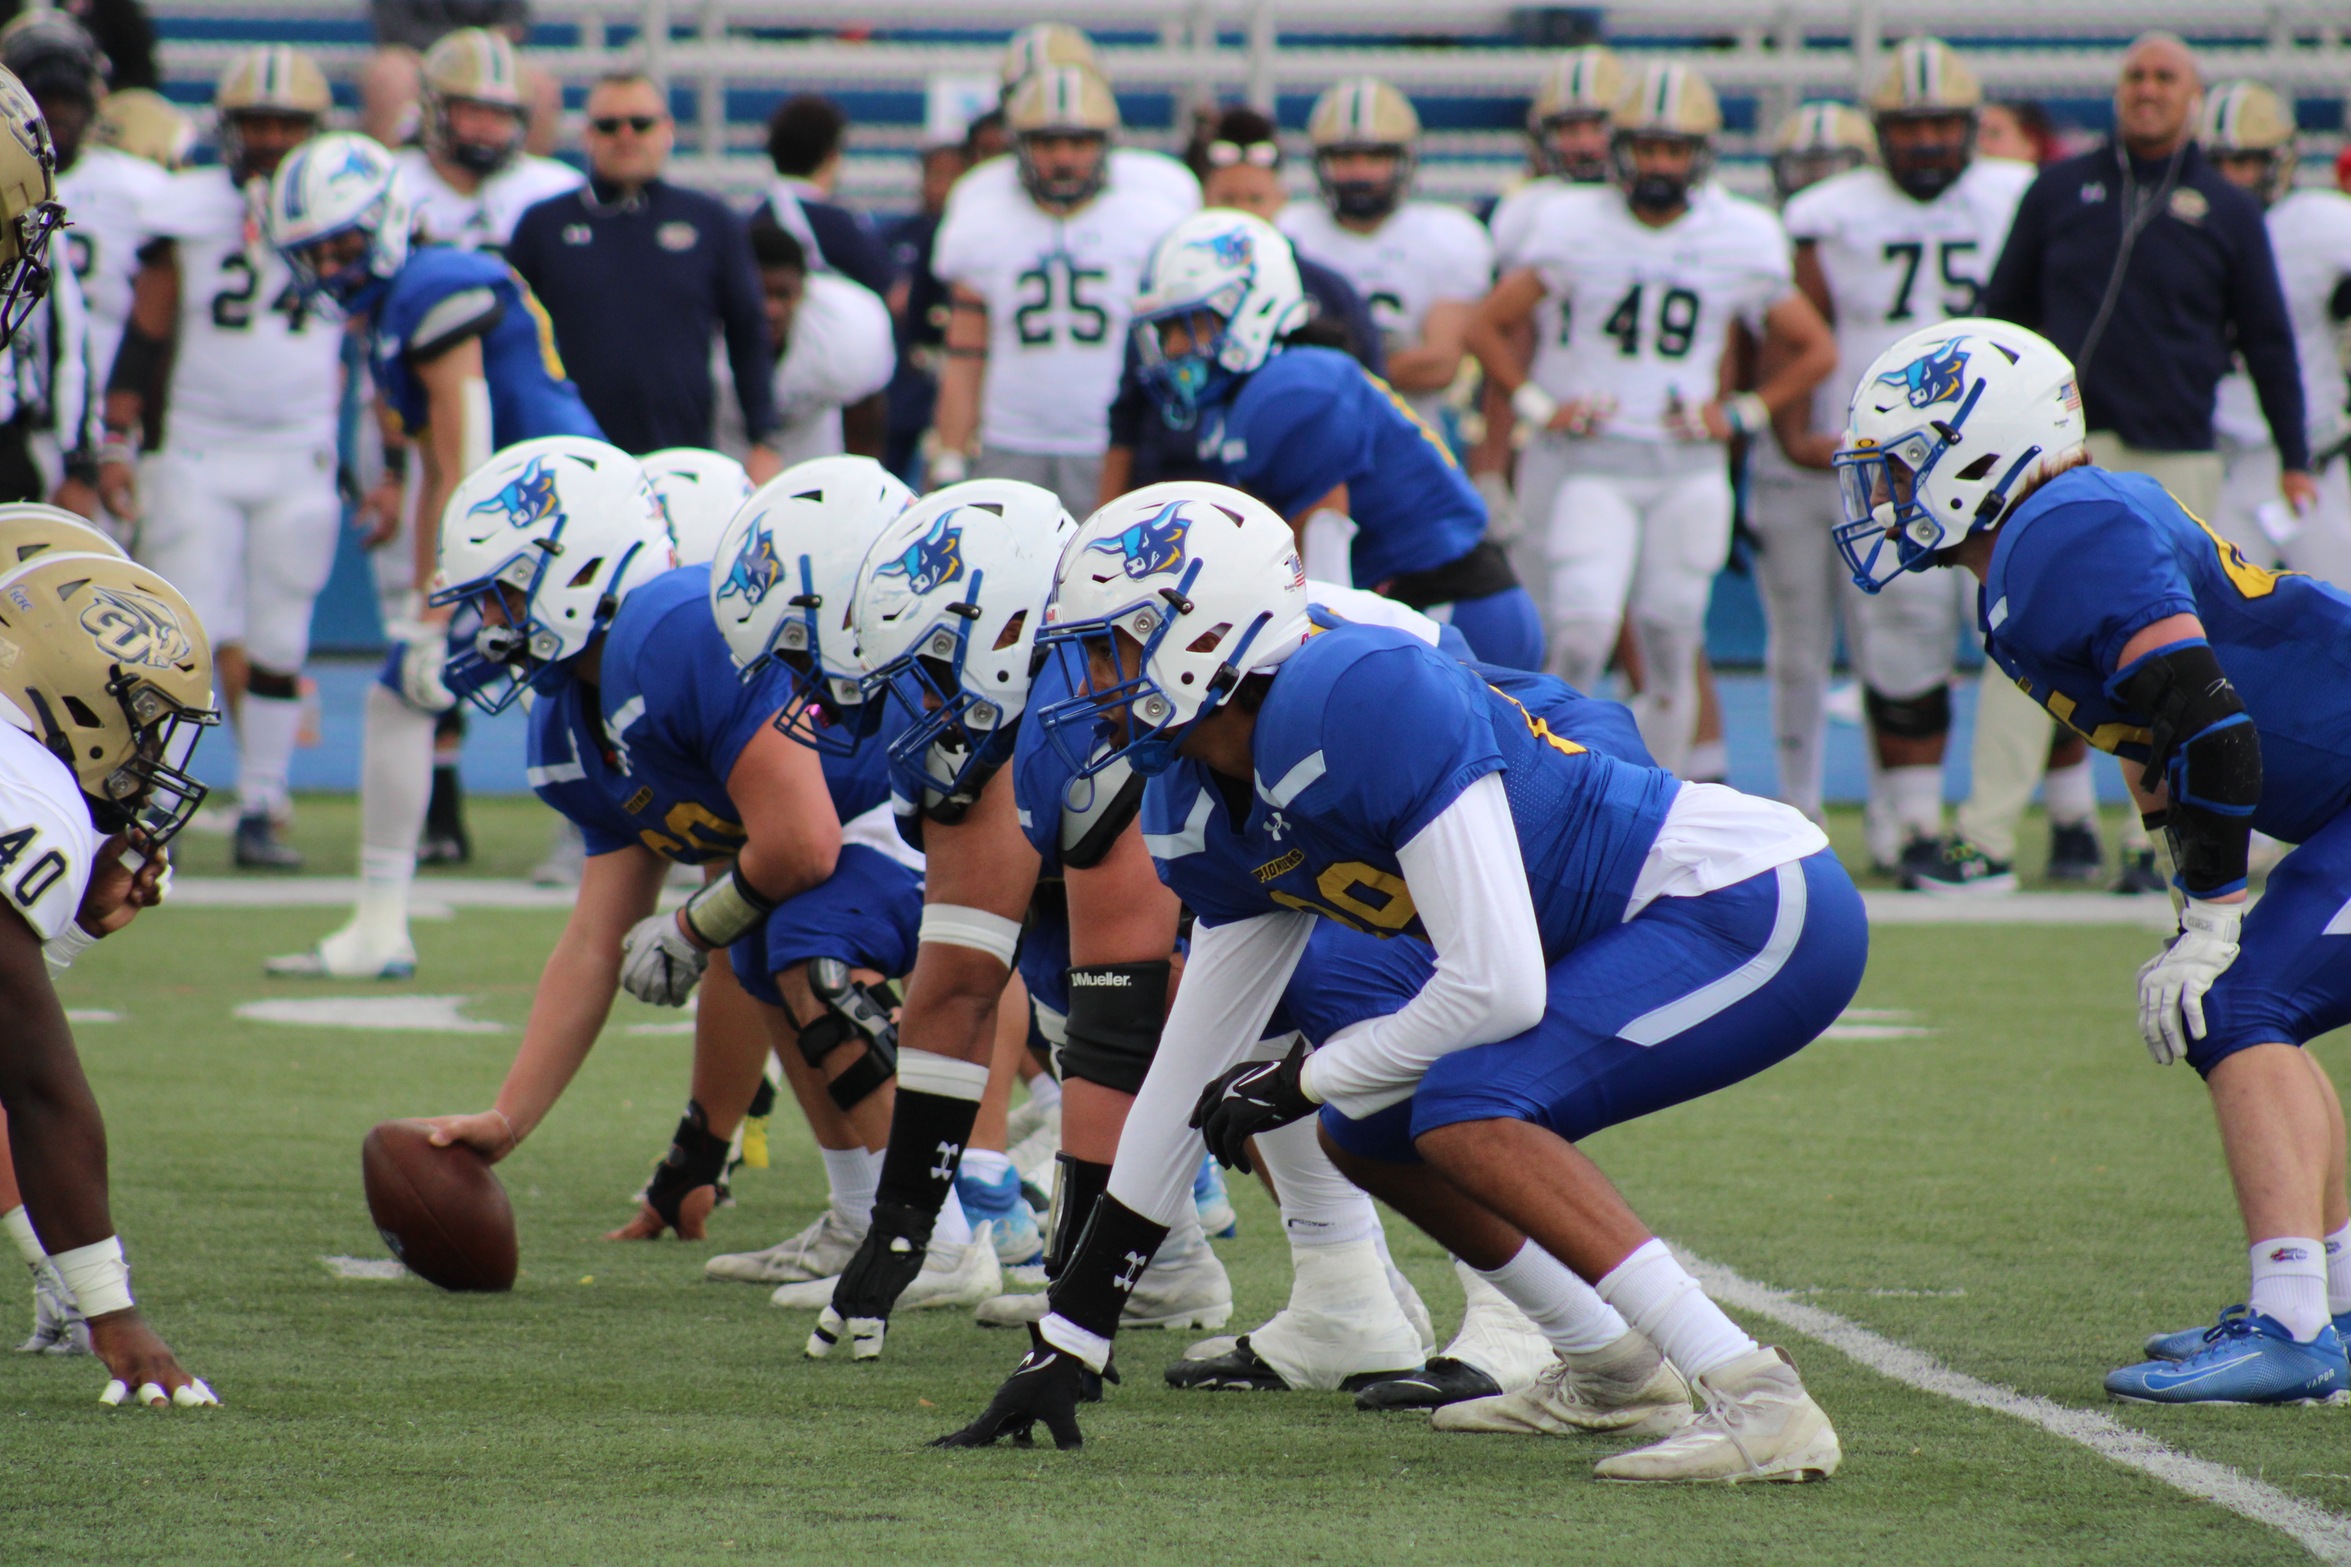 Alfred State Offensive Line